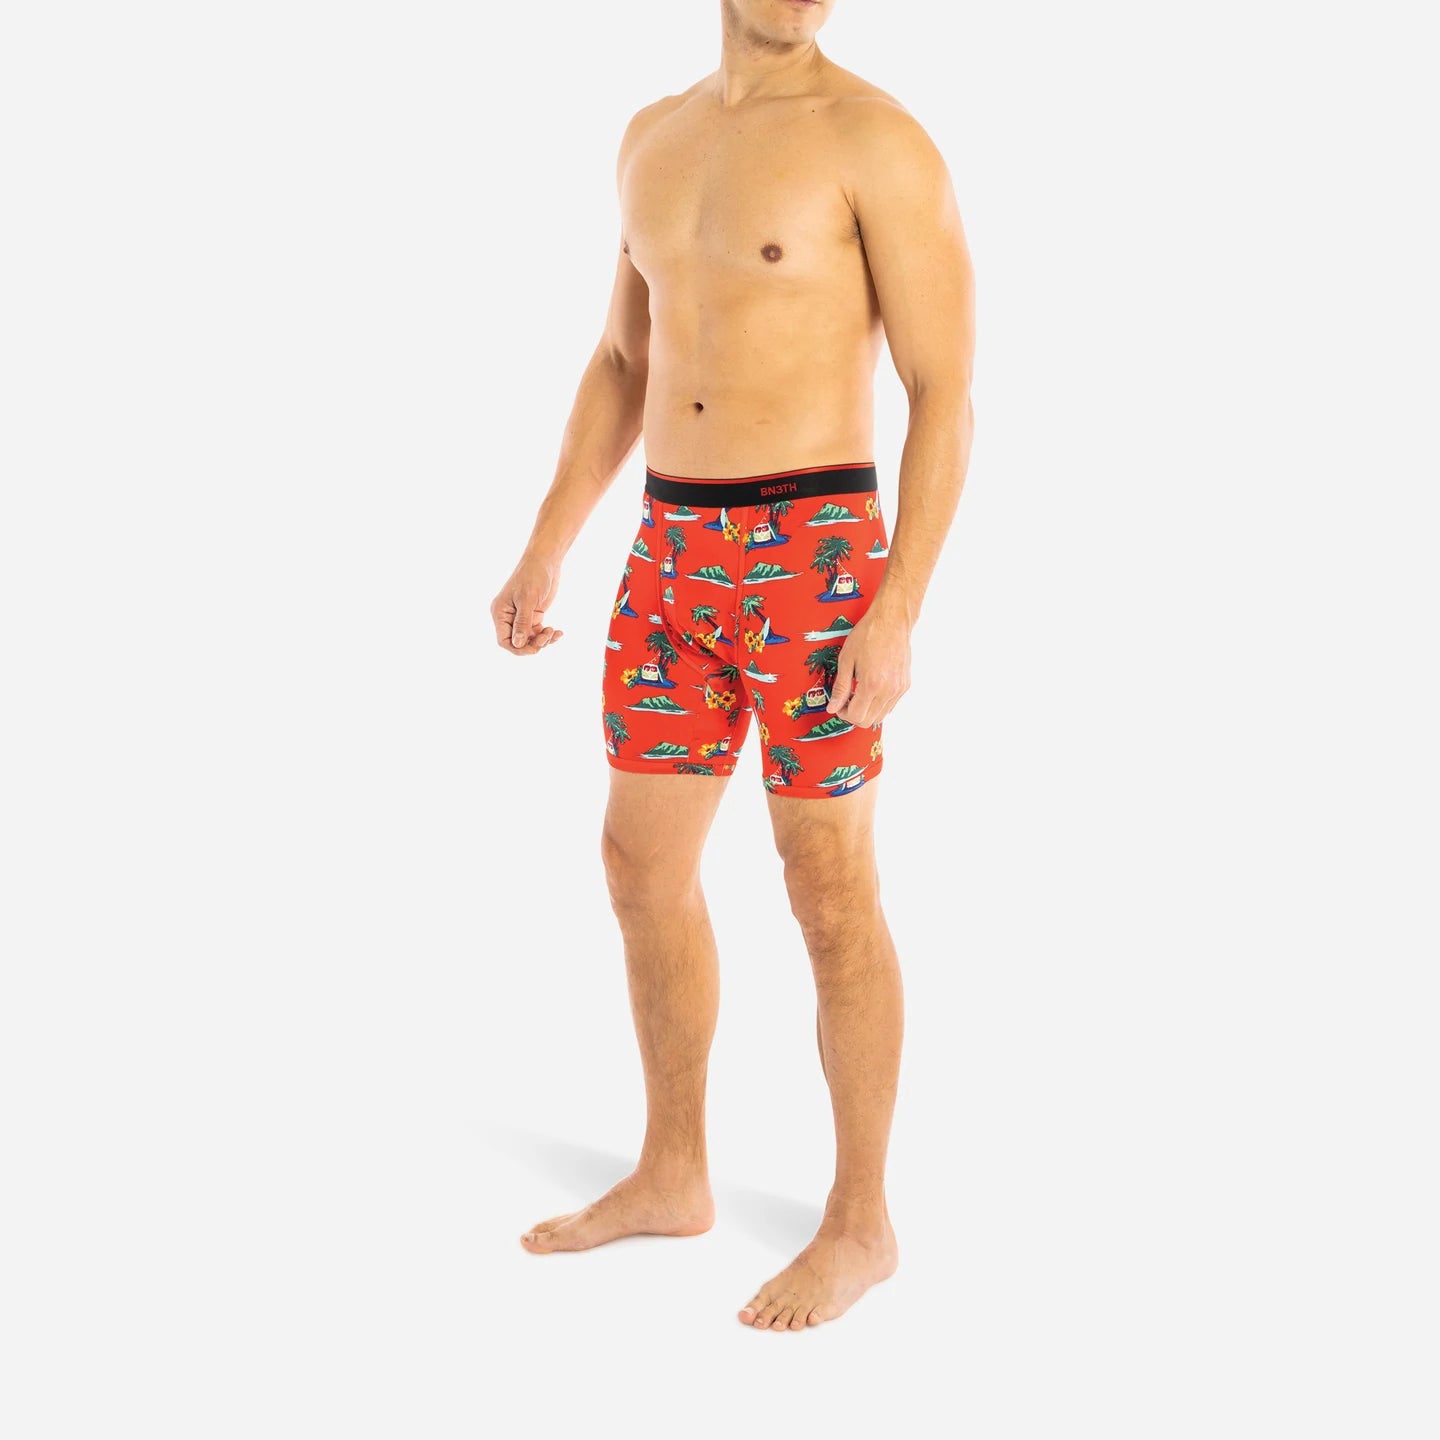 BN3TH 6.5 Classic Boxer Brief - Aloha Red